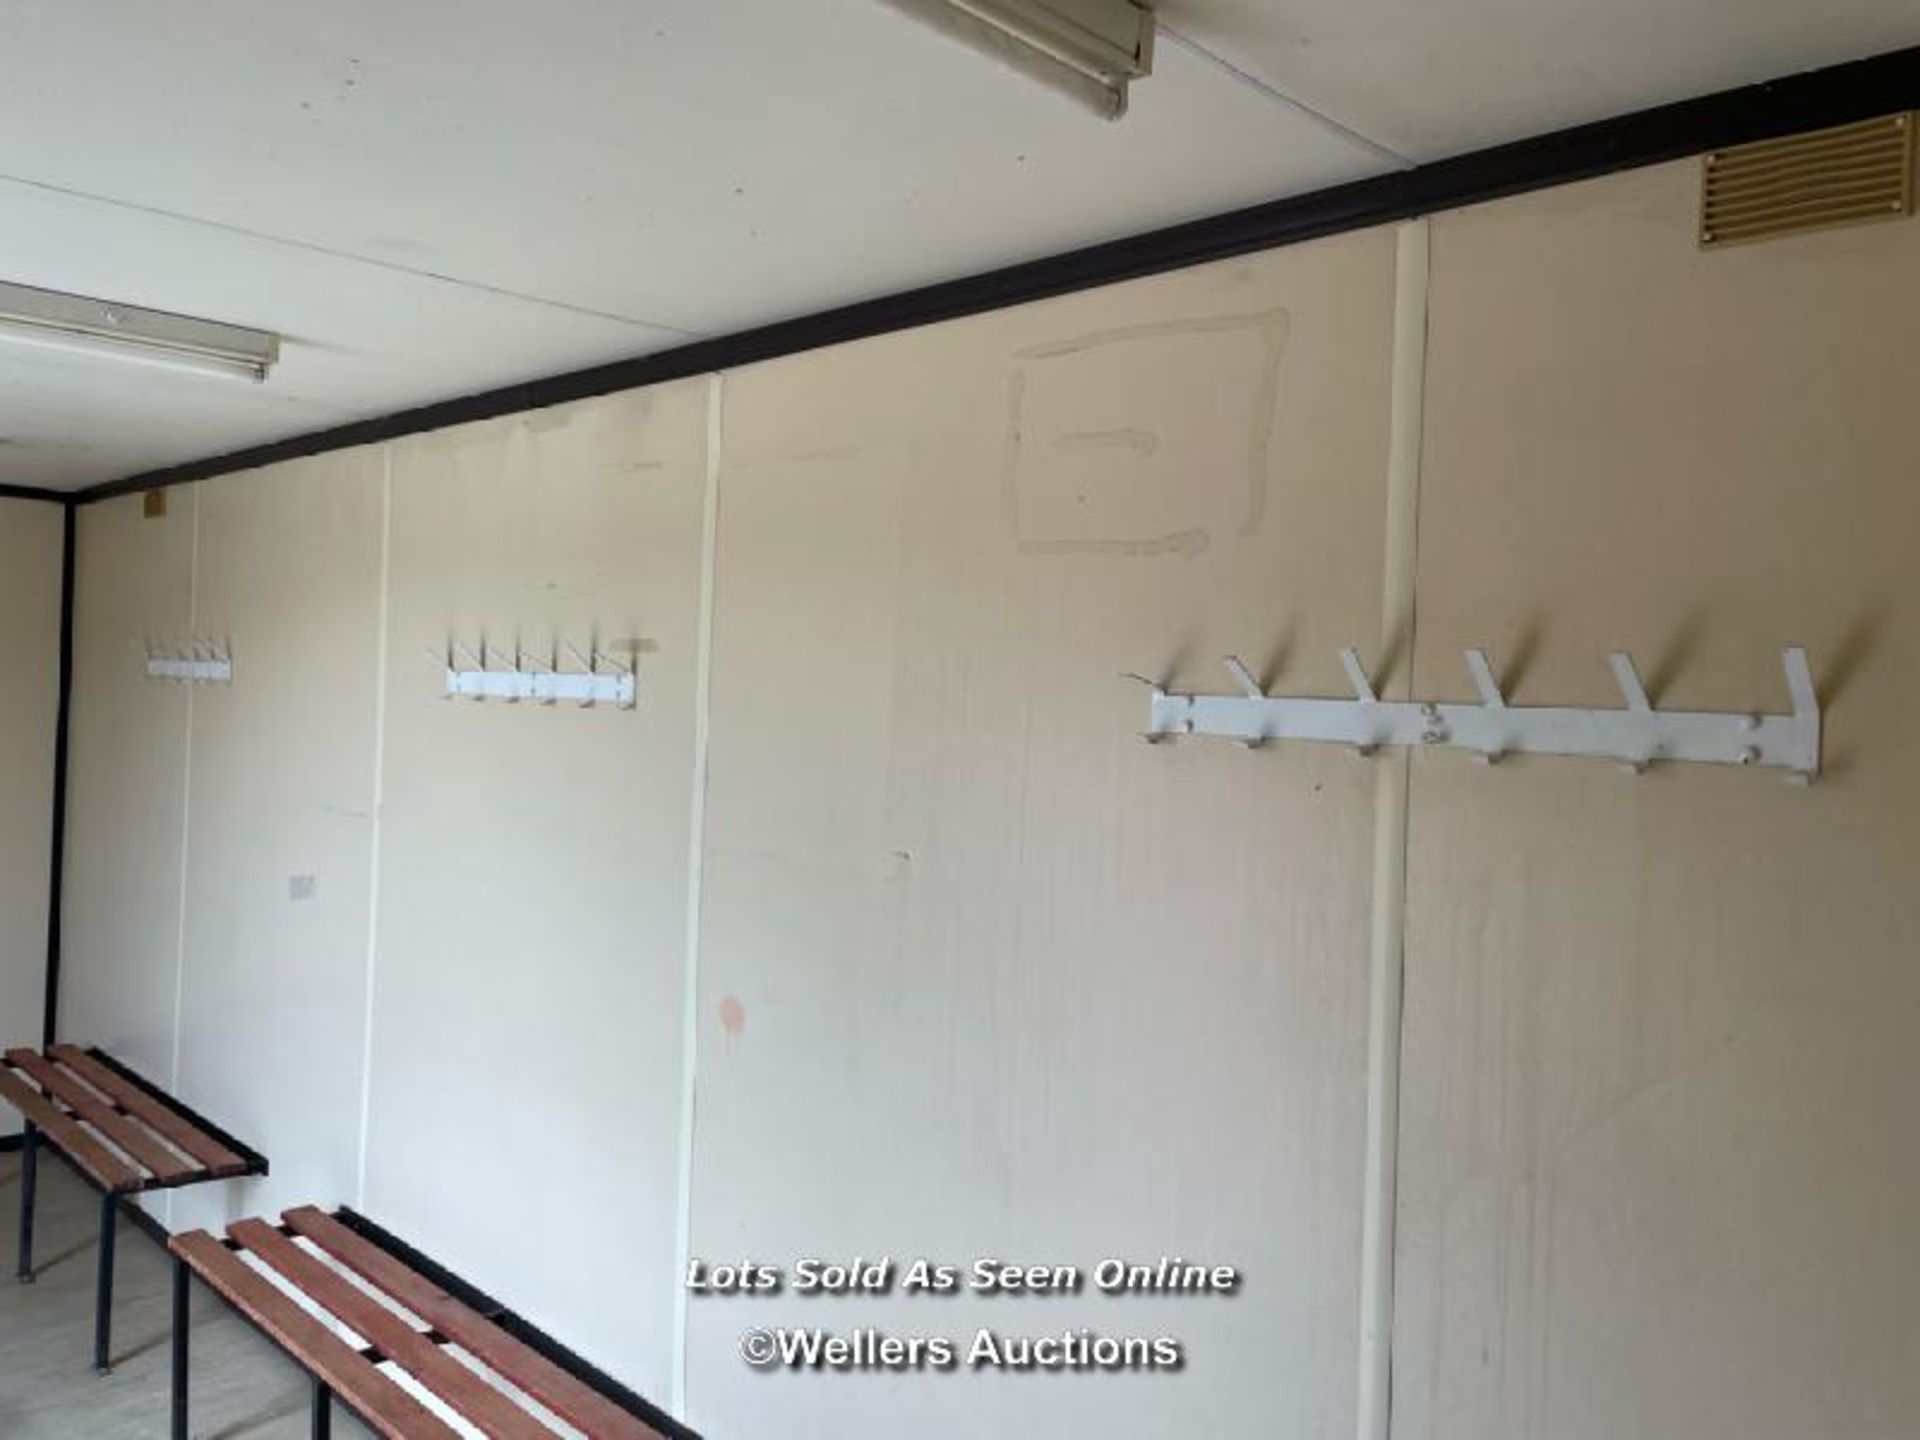 20' X 9' STEEL DRYING ROOM, UNIT INCLUDES TWO HEATERS, MULTIPLE COAT HOOKS, BENCHES AND ELECTRICAL - Image 11 of 15